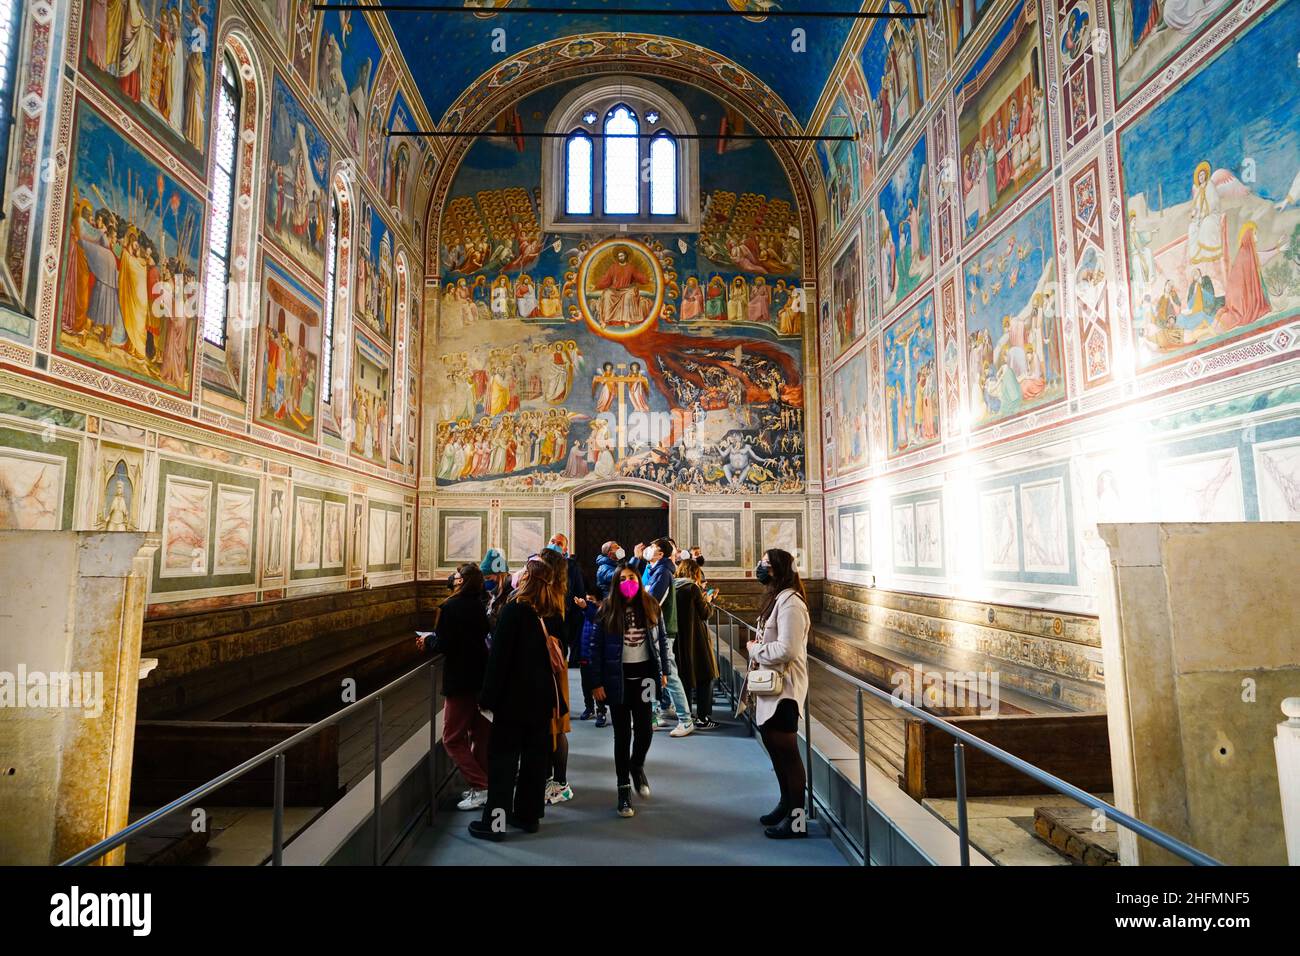 View of the landmark Scrovegni Chapel (Cappella degli Scrovegni, Arena Chapel), part of the Museo Civico of Padua, with a fresco cycle by Giotto compl Stock Photo